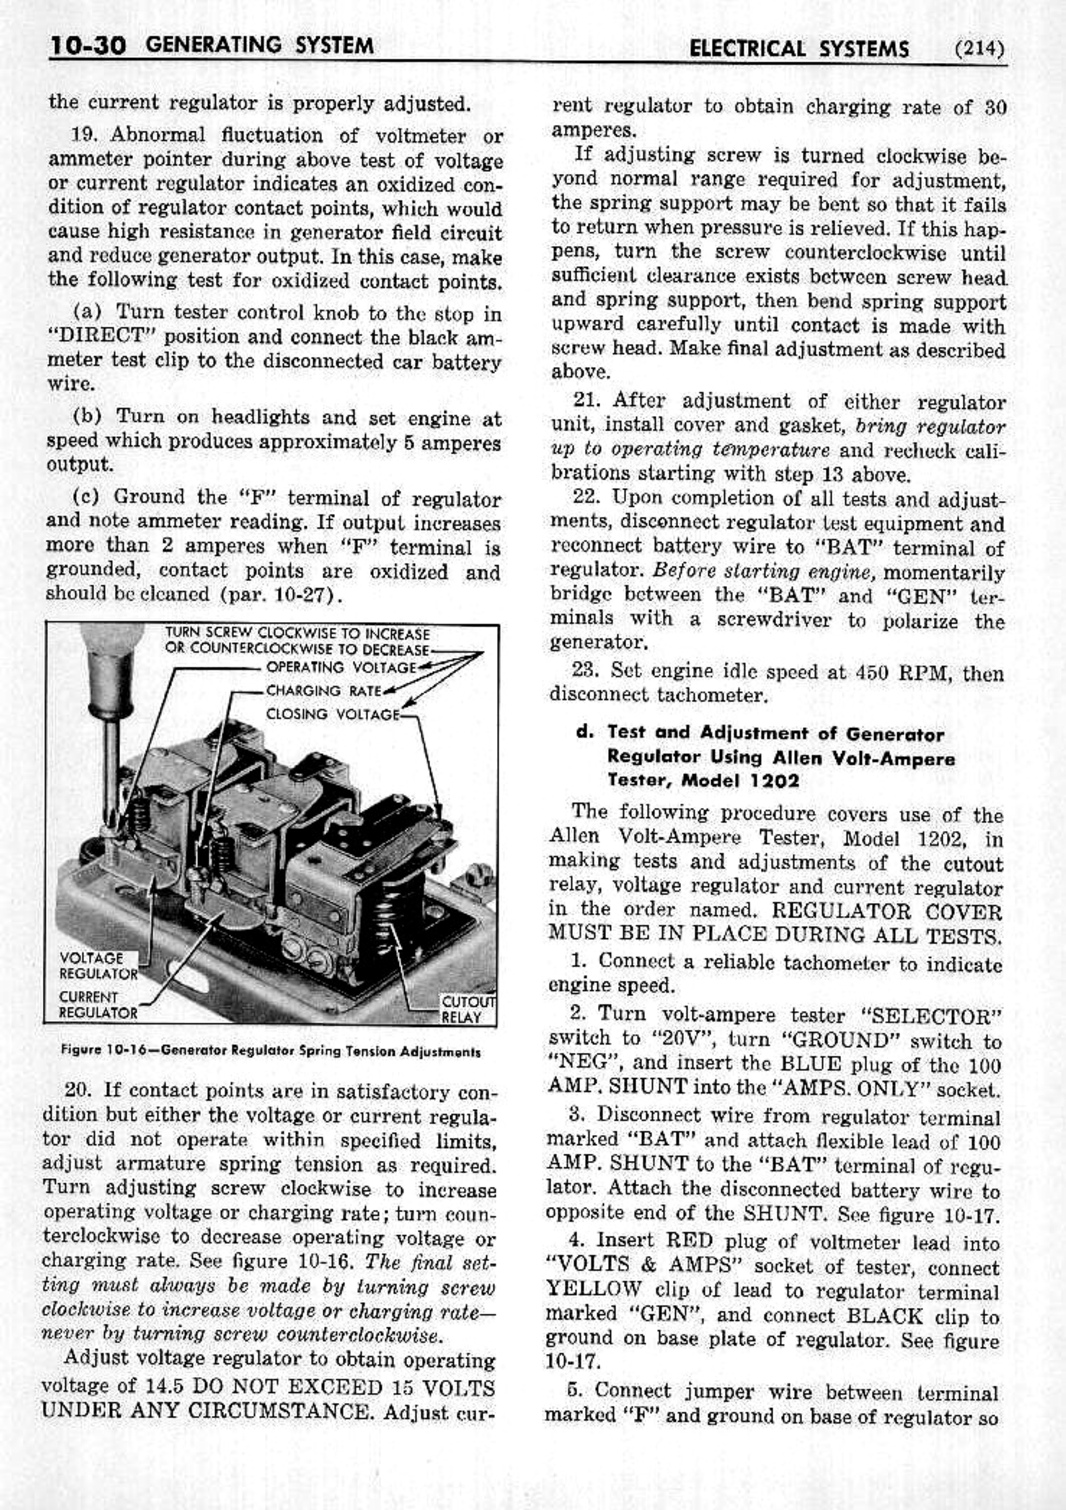 n_11 1953 Buick Shop Manual - Electrical Systems-030-030.jpg